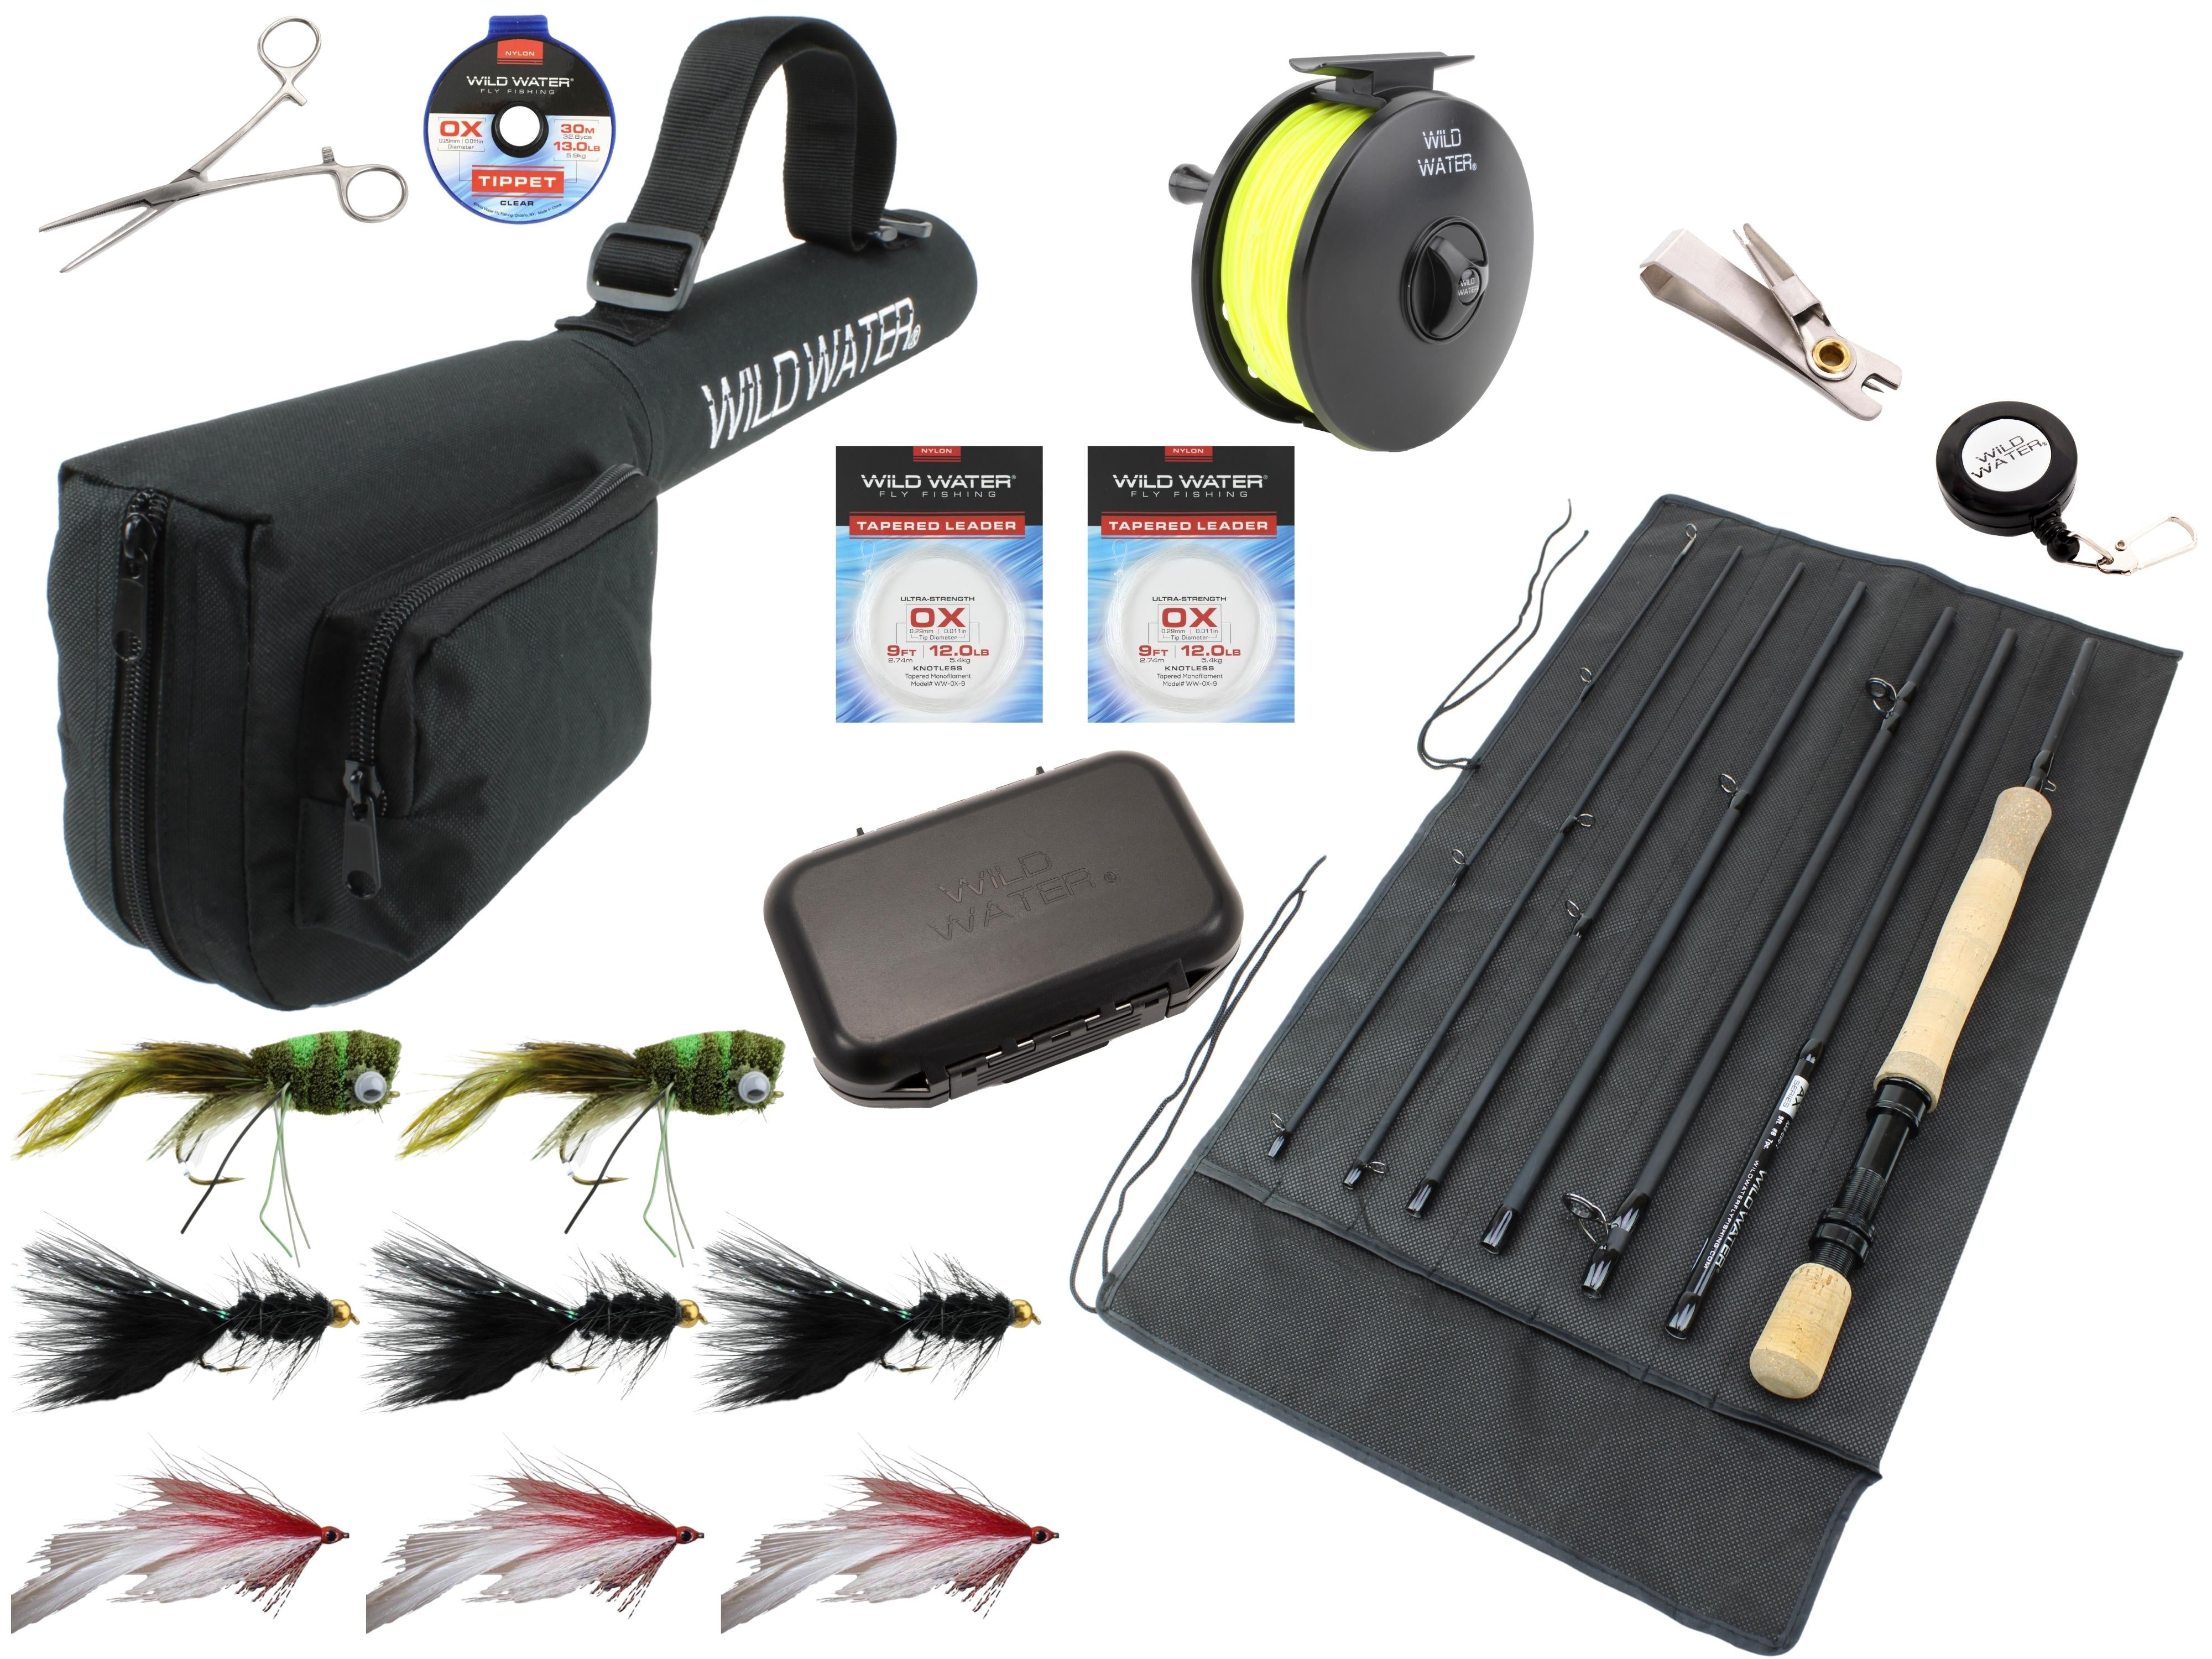 Wild Water Deluxe Freshwater Fly Fishing Combo, 9 ft 8 wt 7 Piece